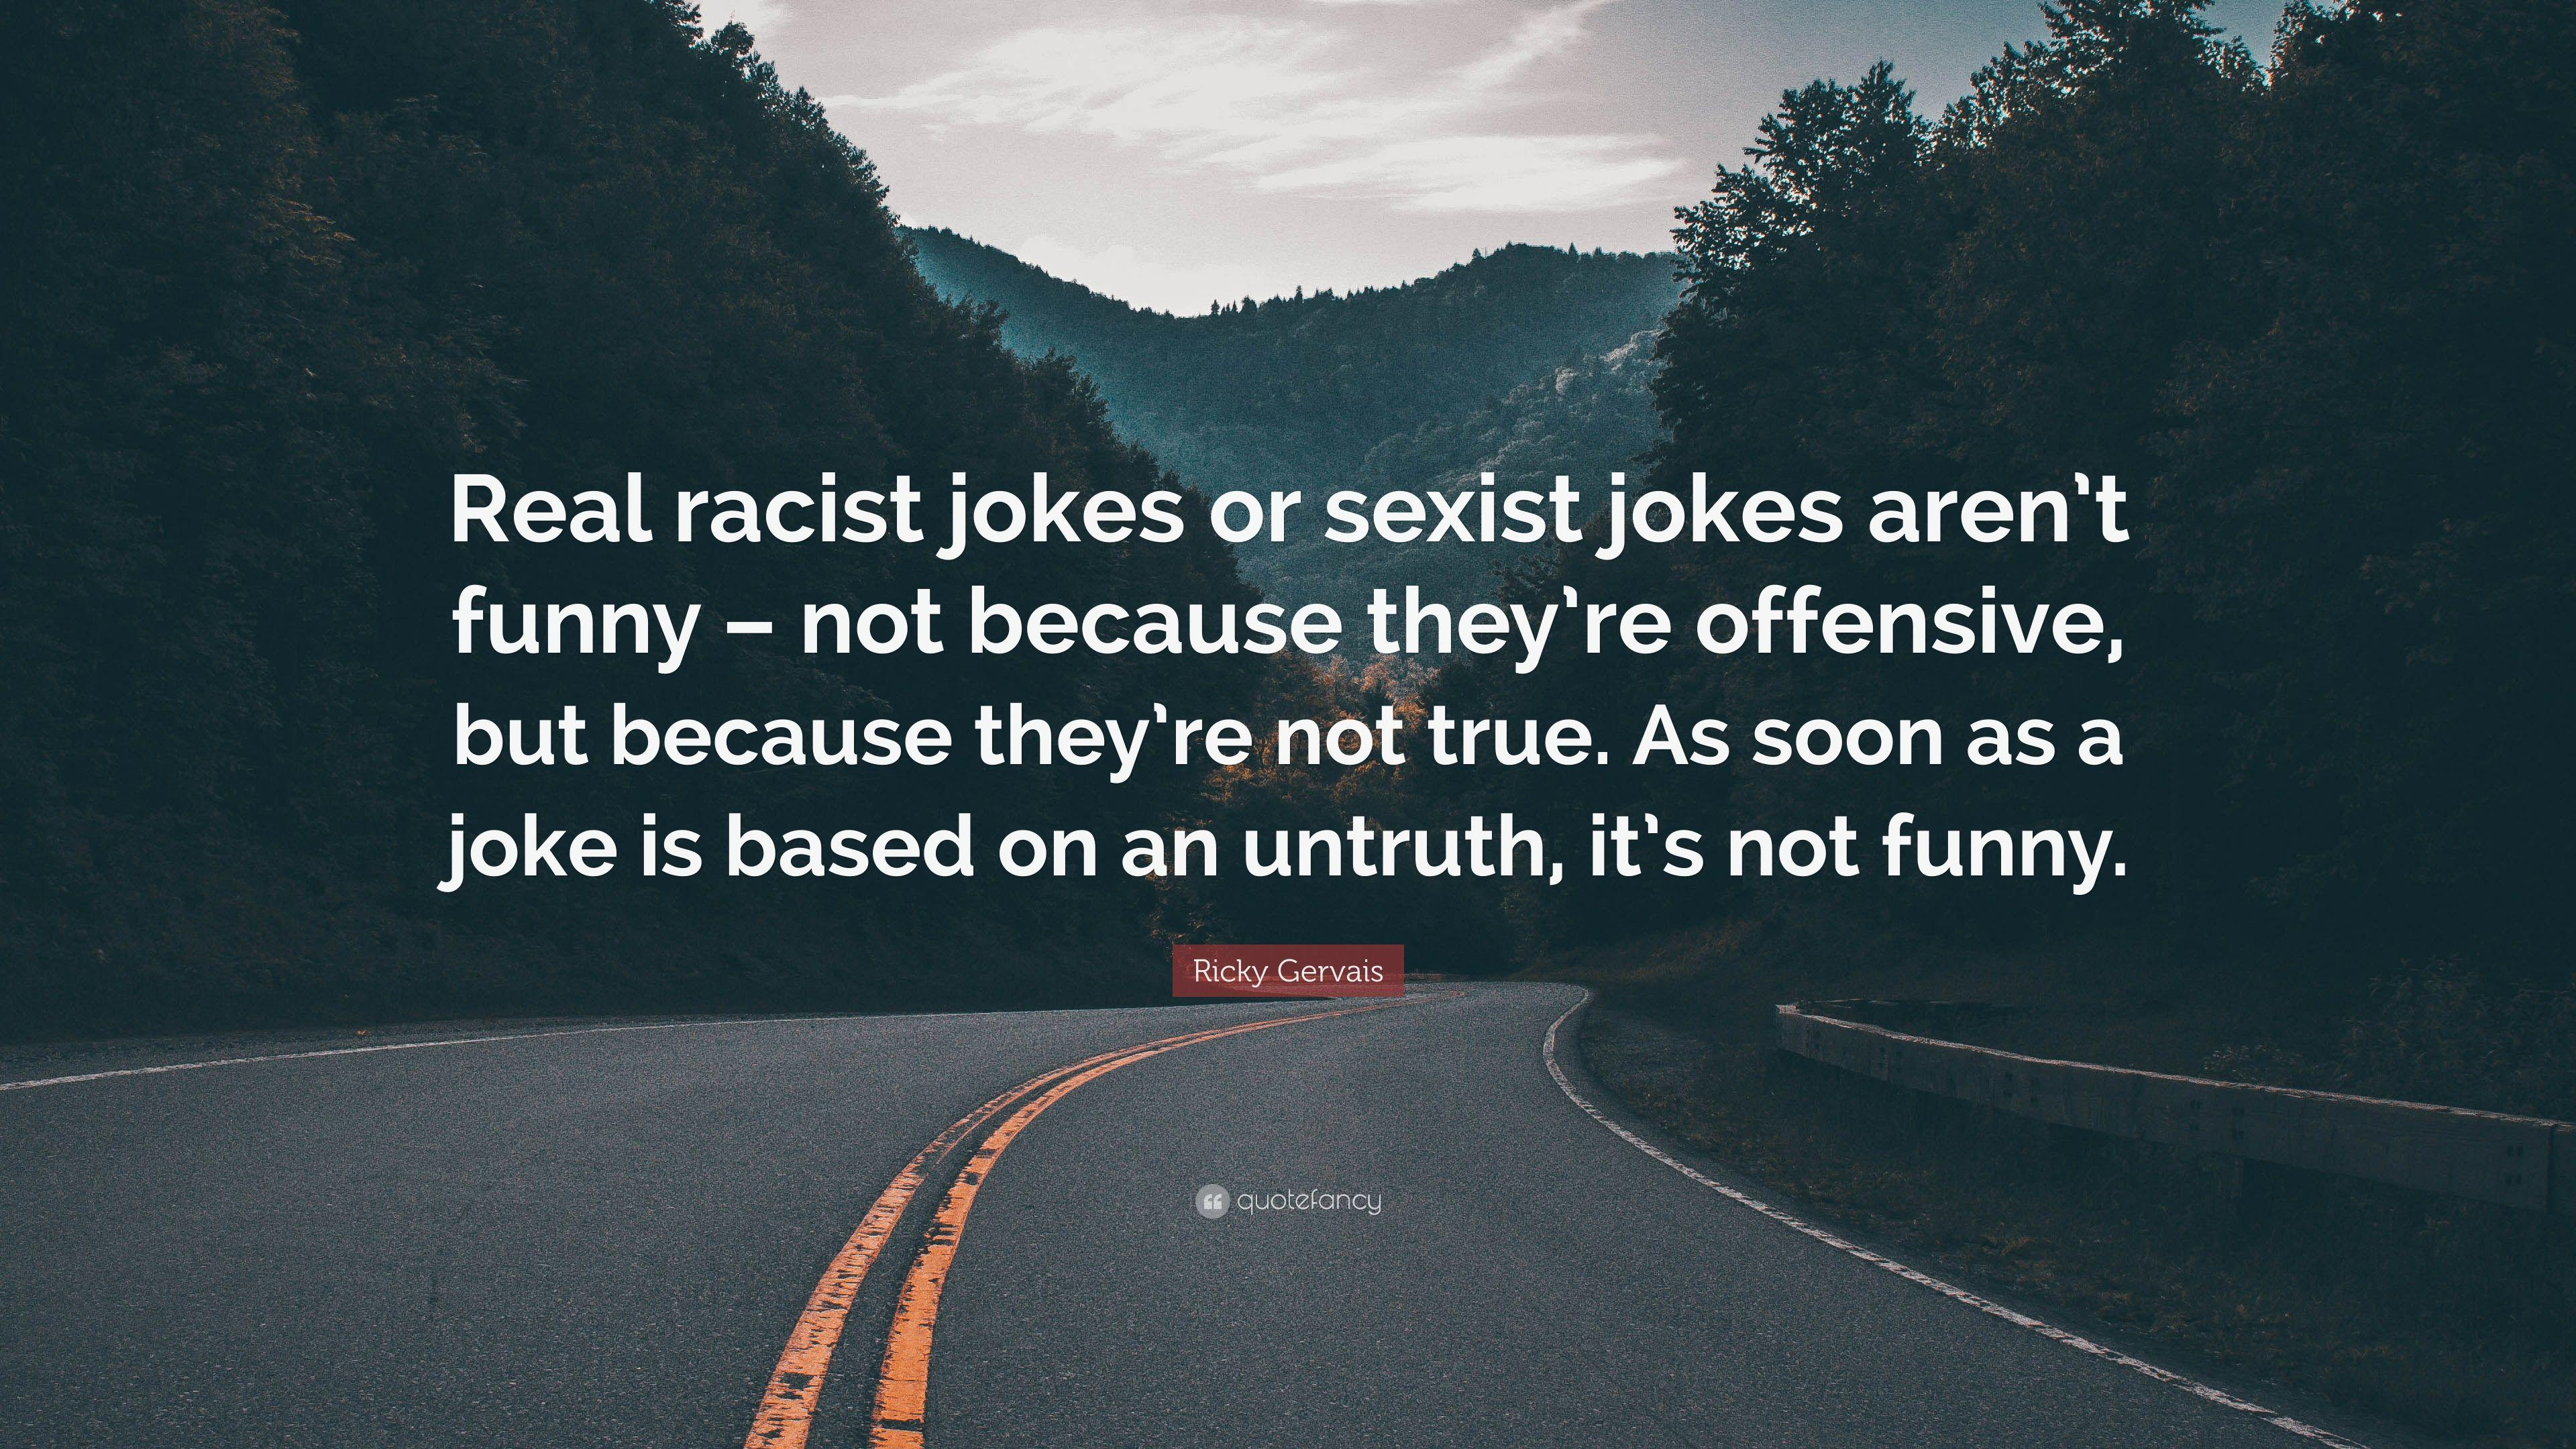 Ricky Gervais Quote: “Real racist jokes or sexist jokes aren't funny